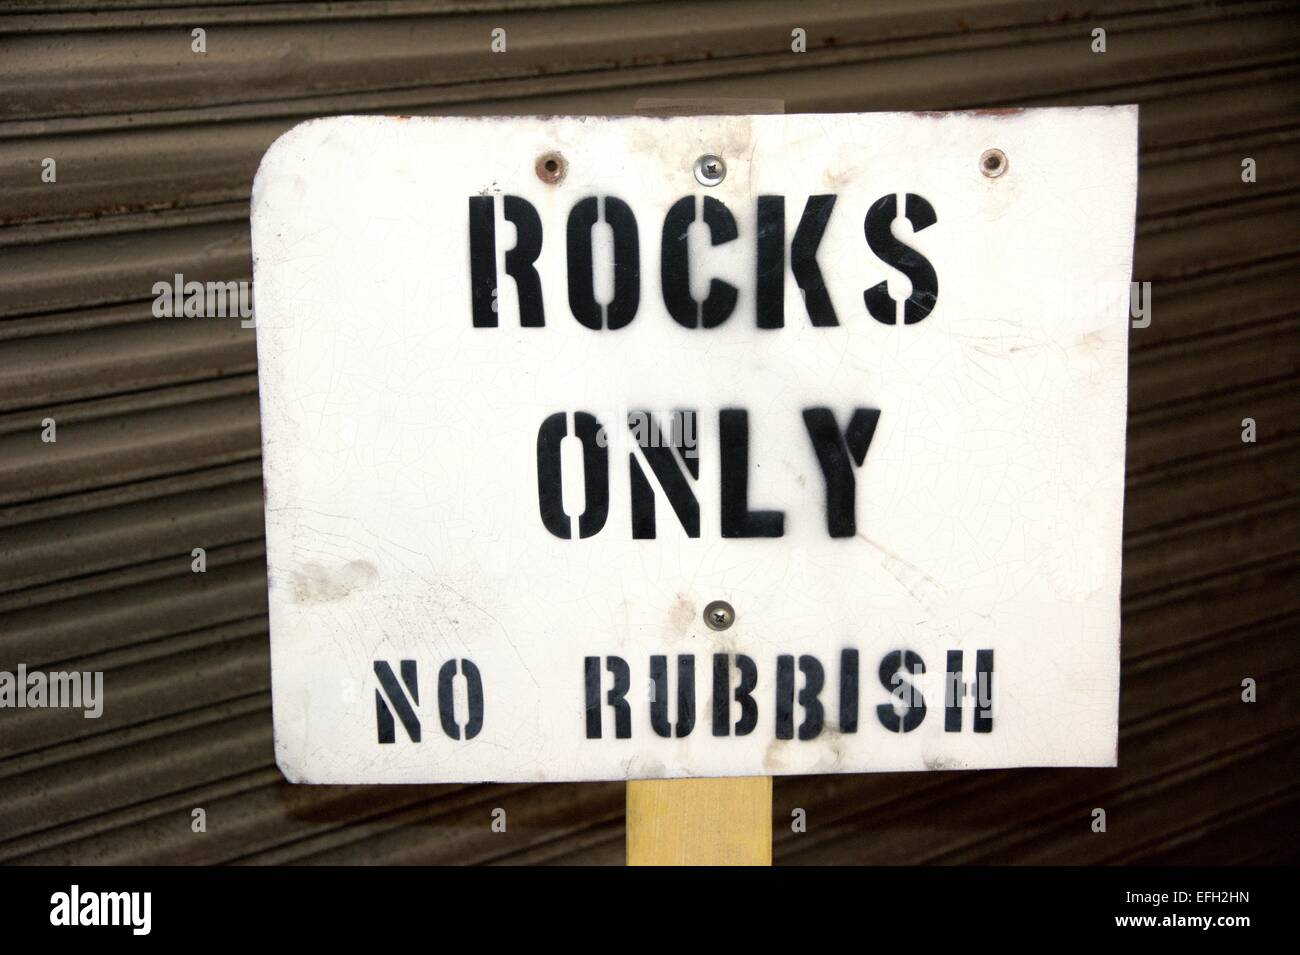 Rocks only sign Stock Photo